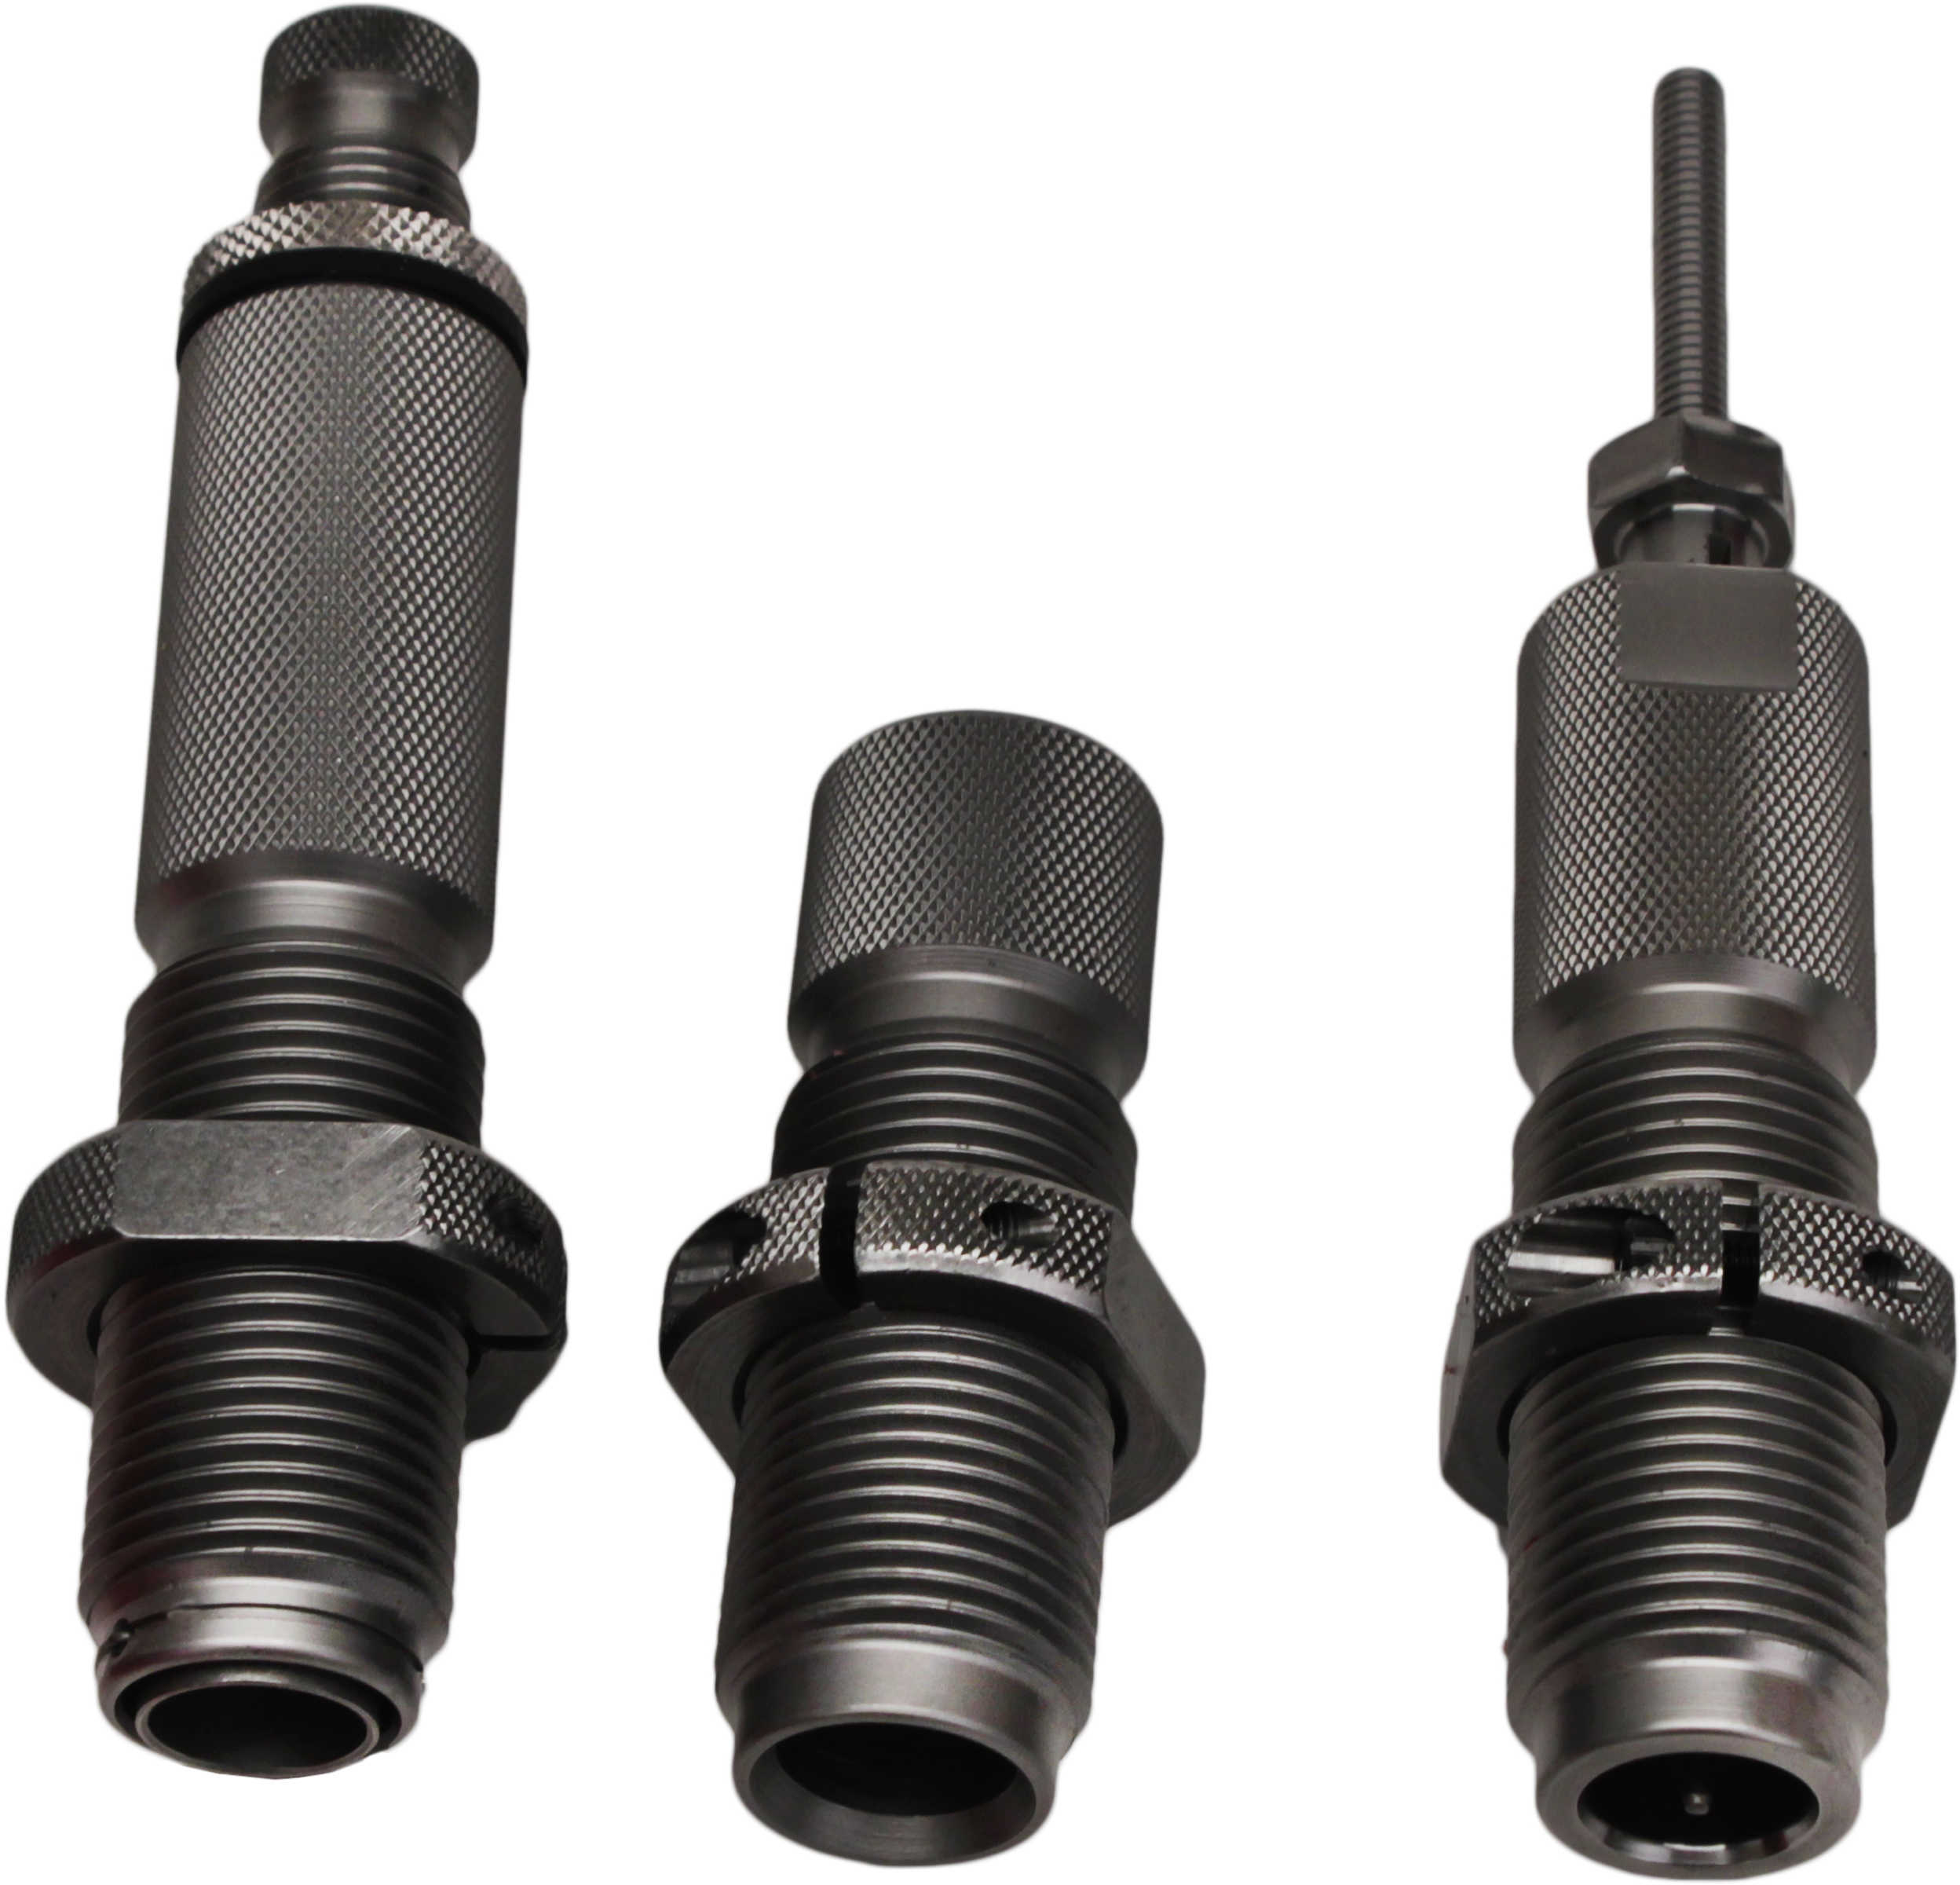 Hornady Series II 3-Die Set 45/70 Government Md: 546566